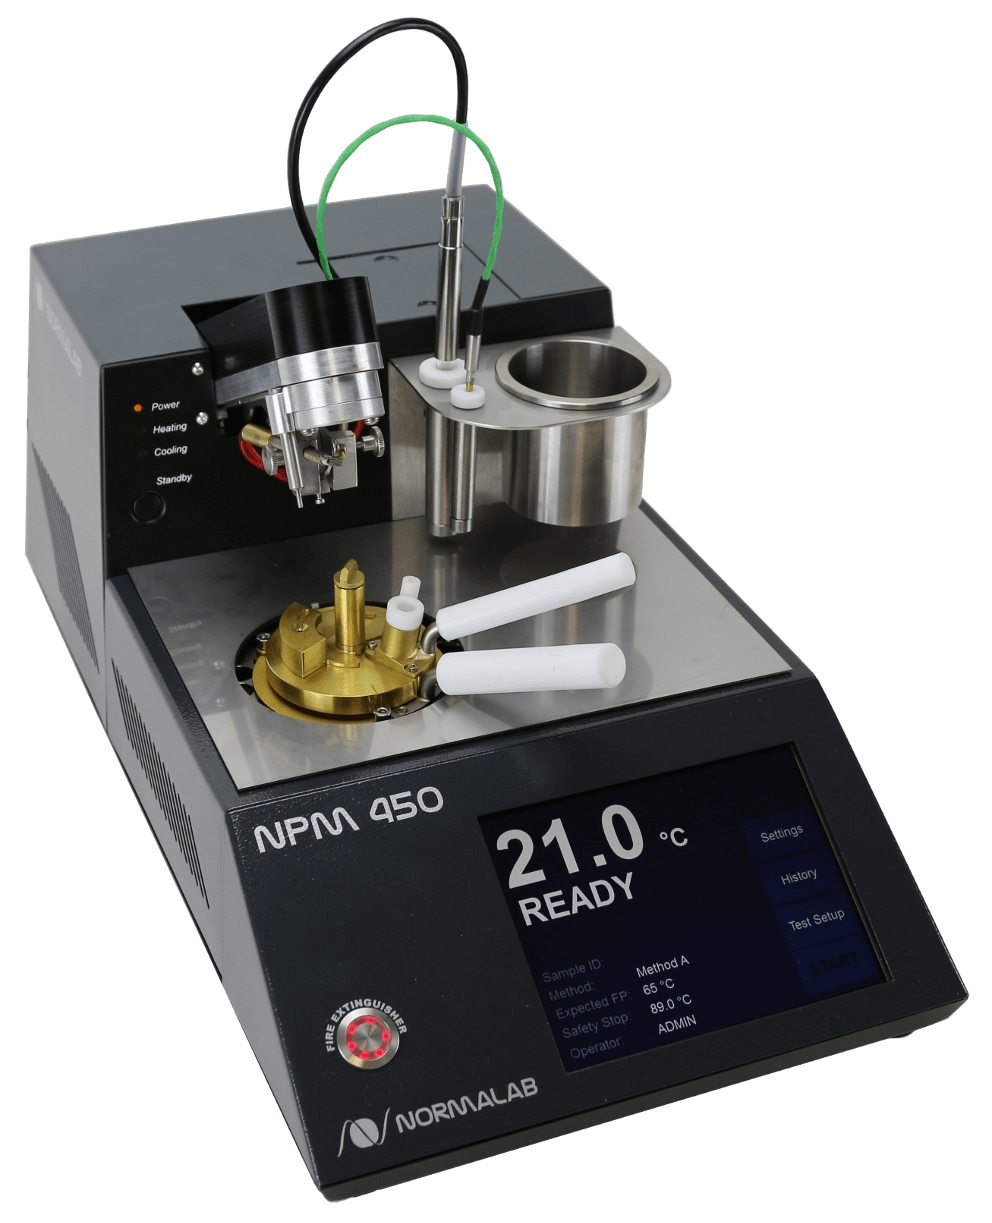 Flash point by pensky-martens closed cup tester - automated